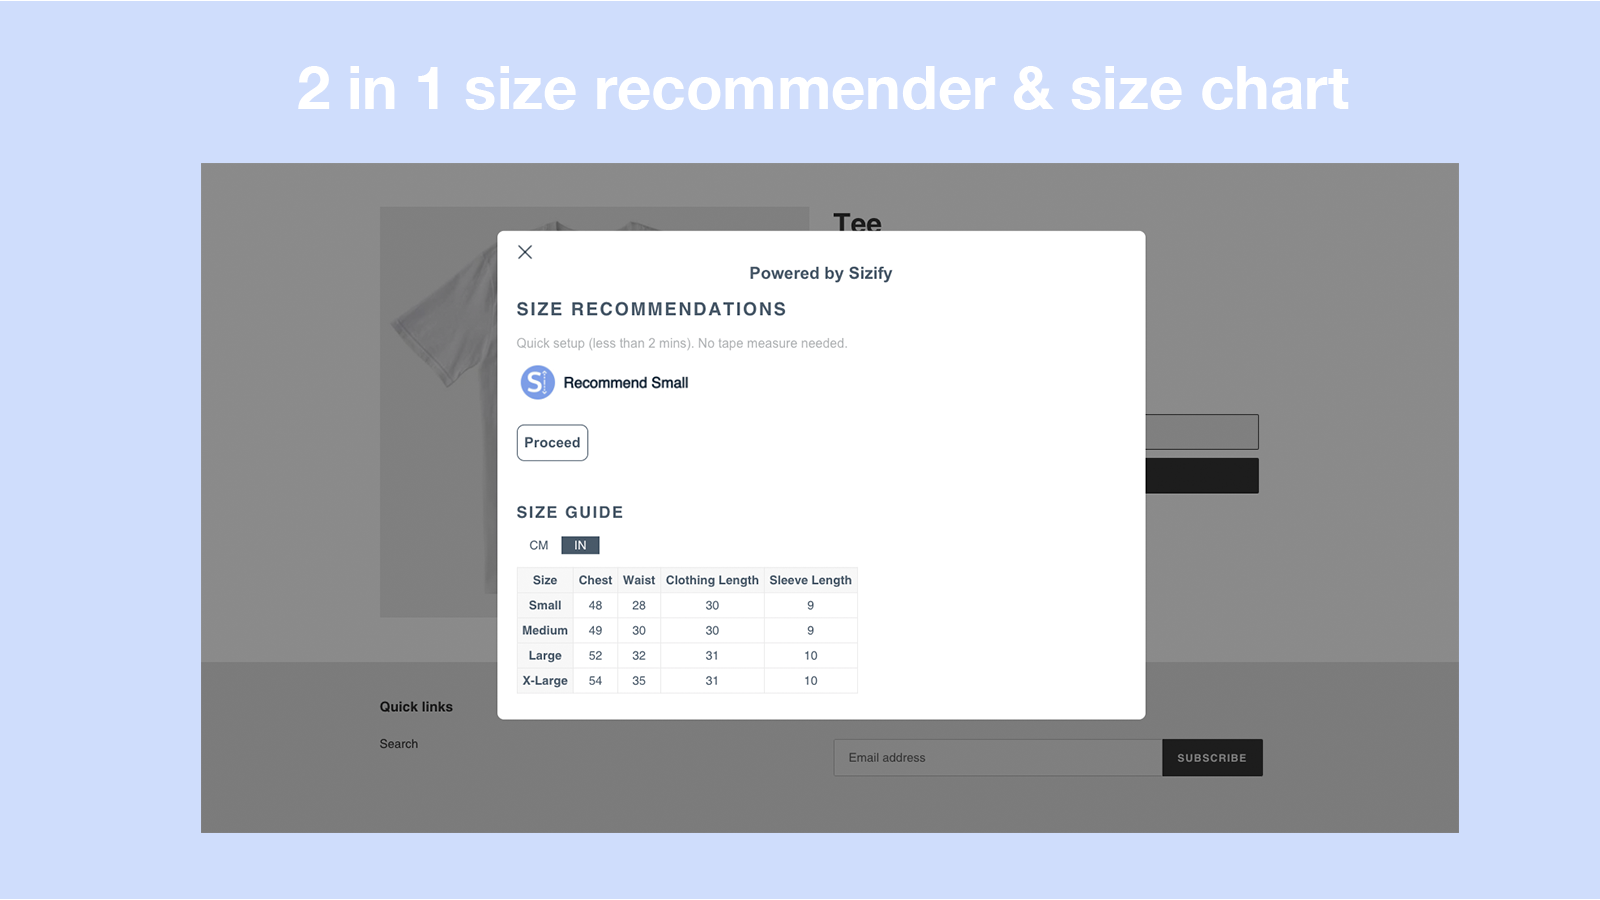 2 in 1 size recommender & size chart